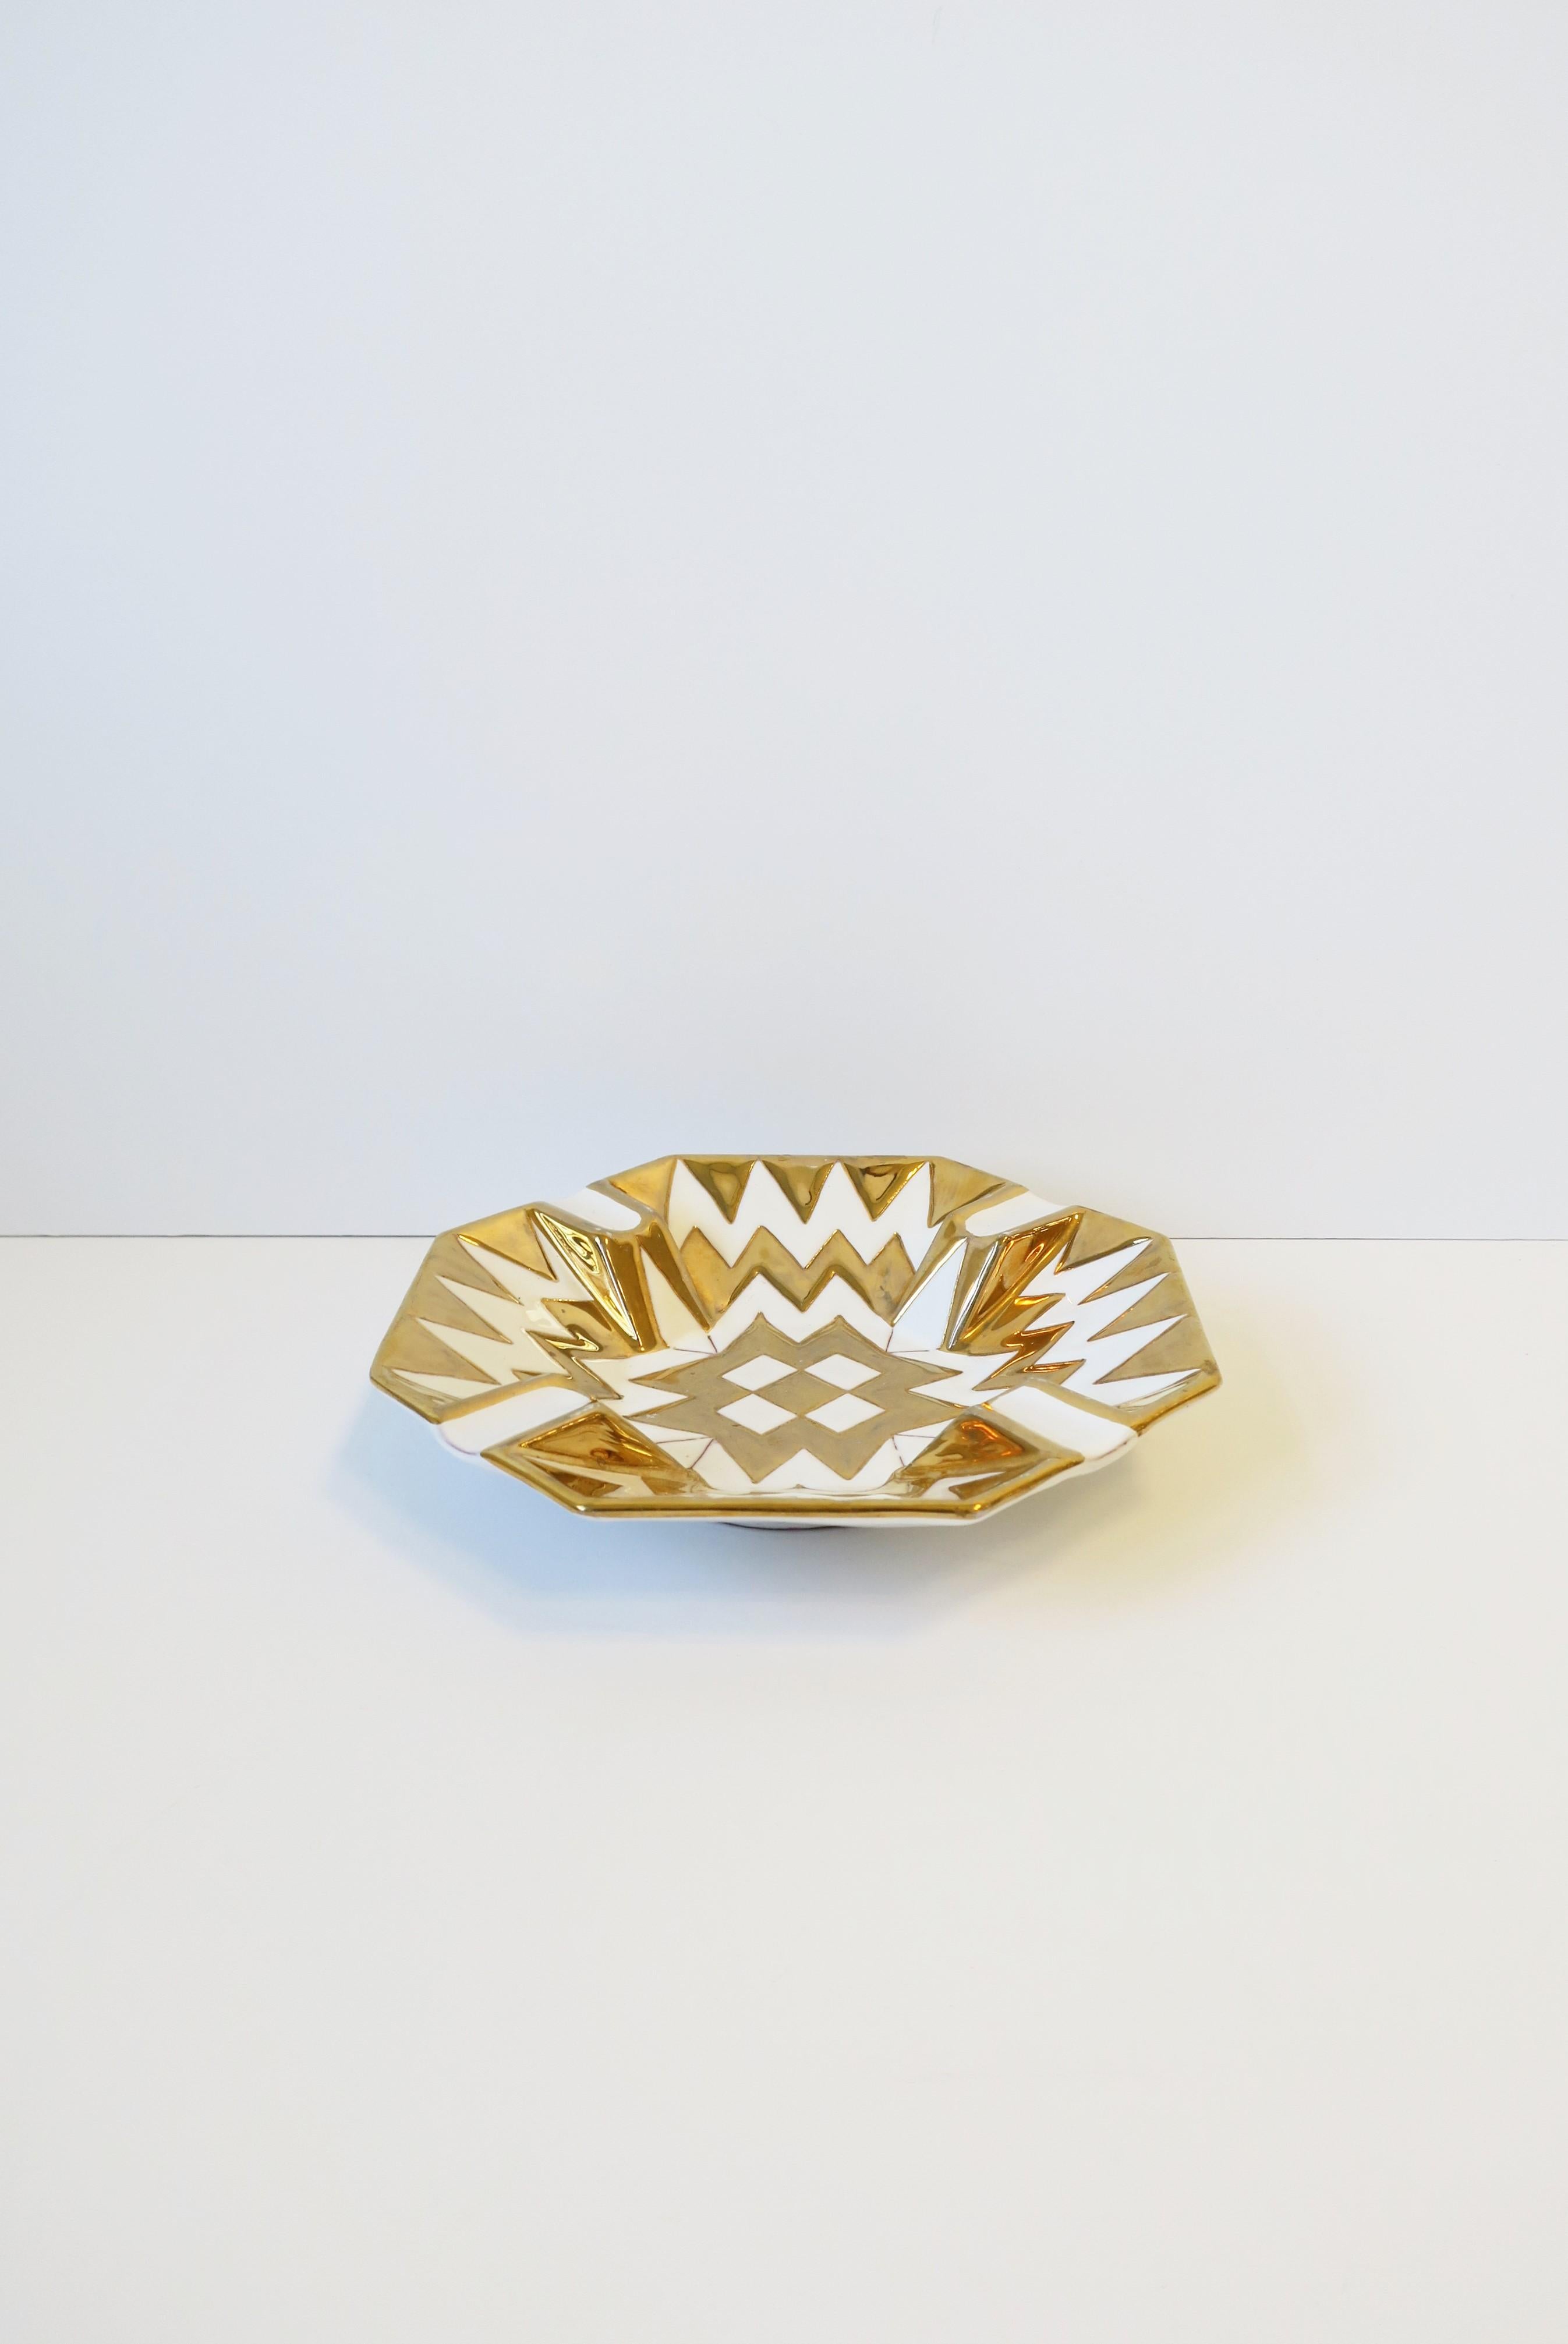 Italian White and Gold Catchall Vide-Poche or Ashtray For Sale 3